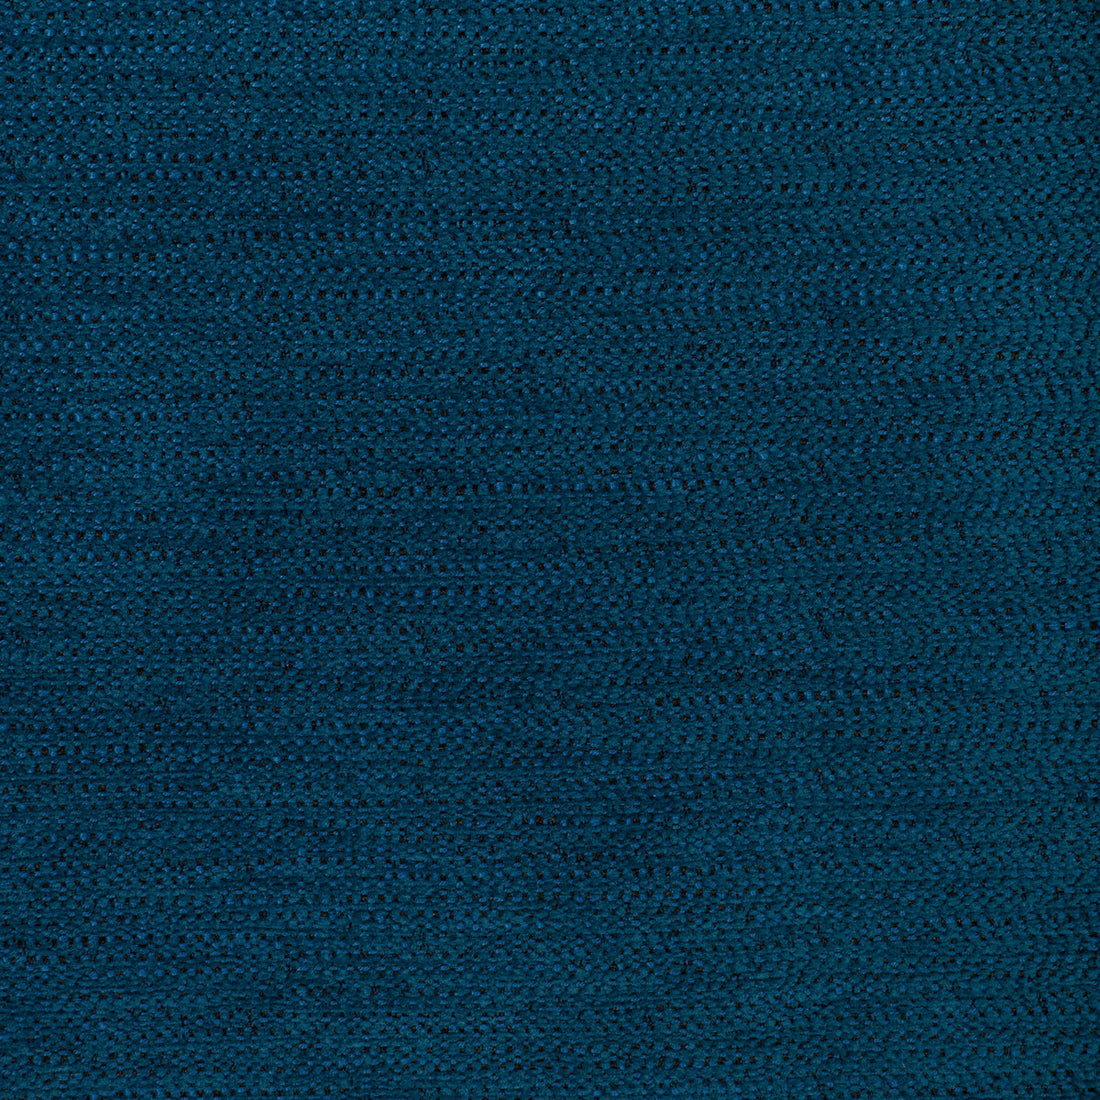 Recoup fabric in marine color - pattern 36569.50.0 - by Kravet Contract in the Seaqual collection